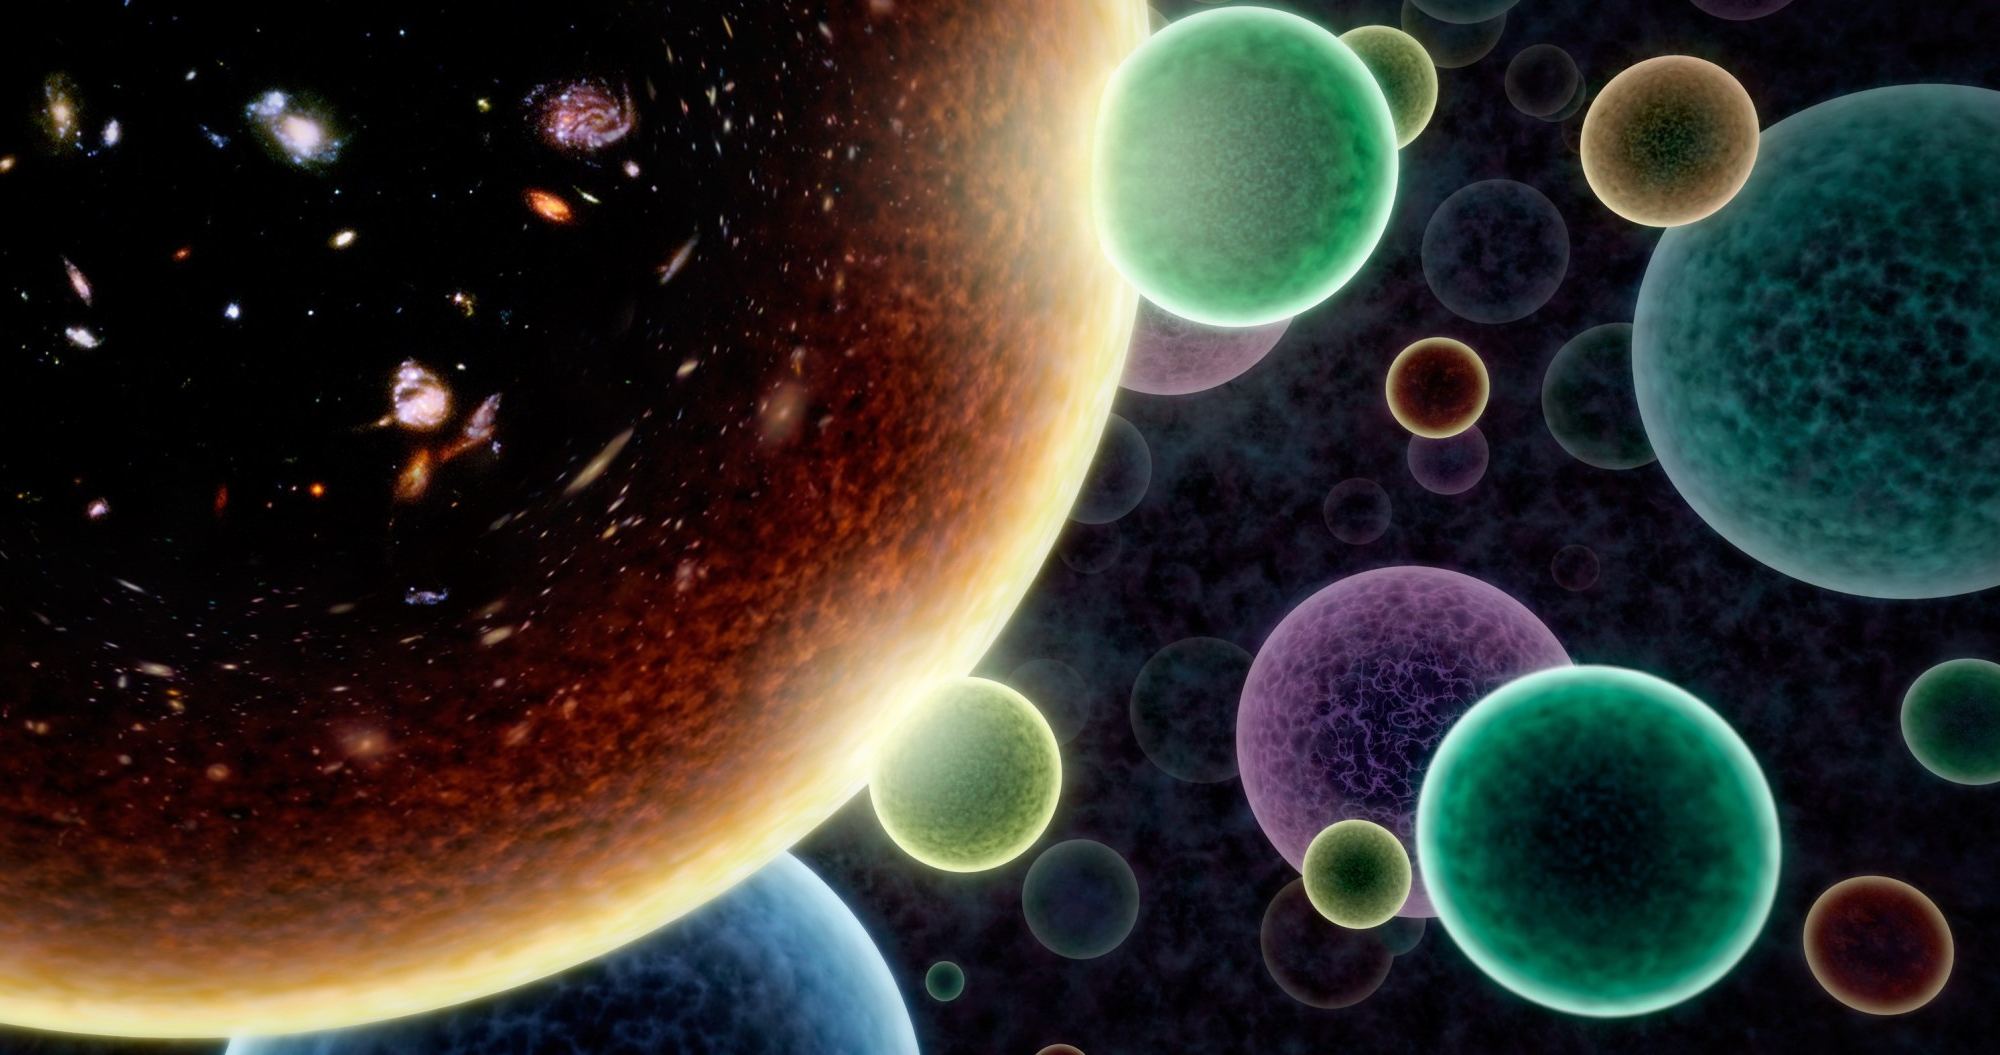 Illustration: Visualization of our universe in the multiverse